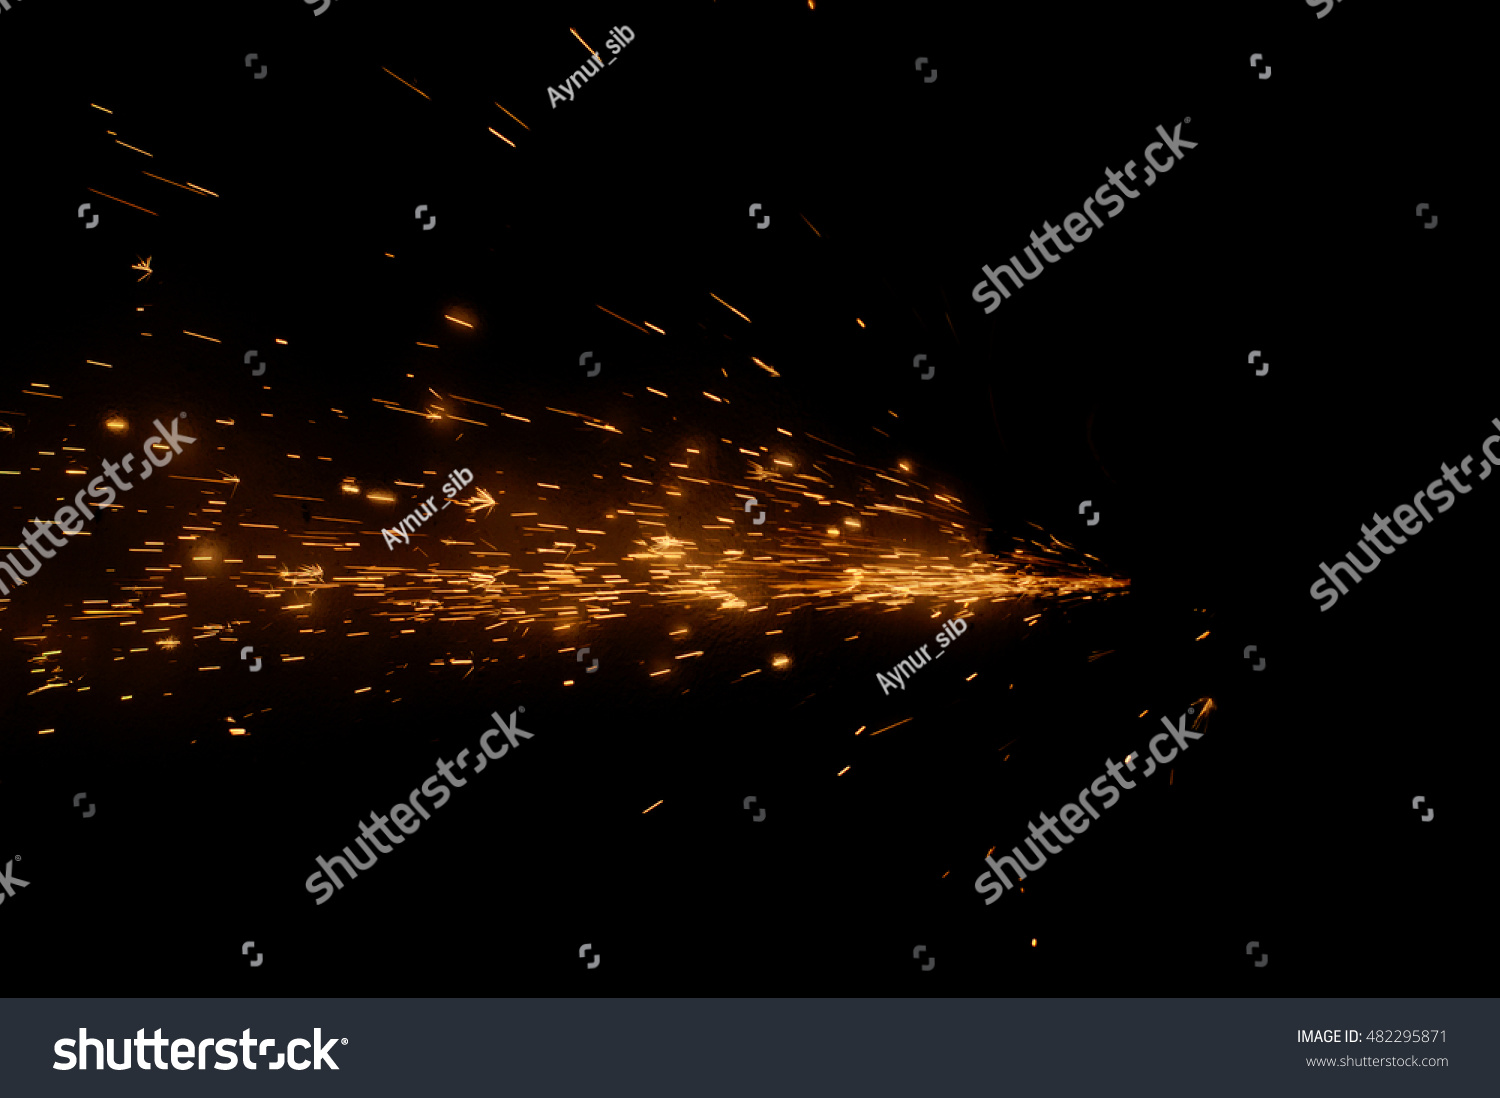 Fire sparks on a black background during metal cutting, hot burning element in flame  #482295871